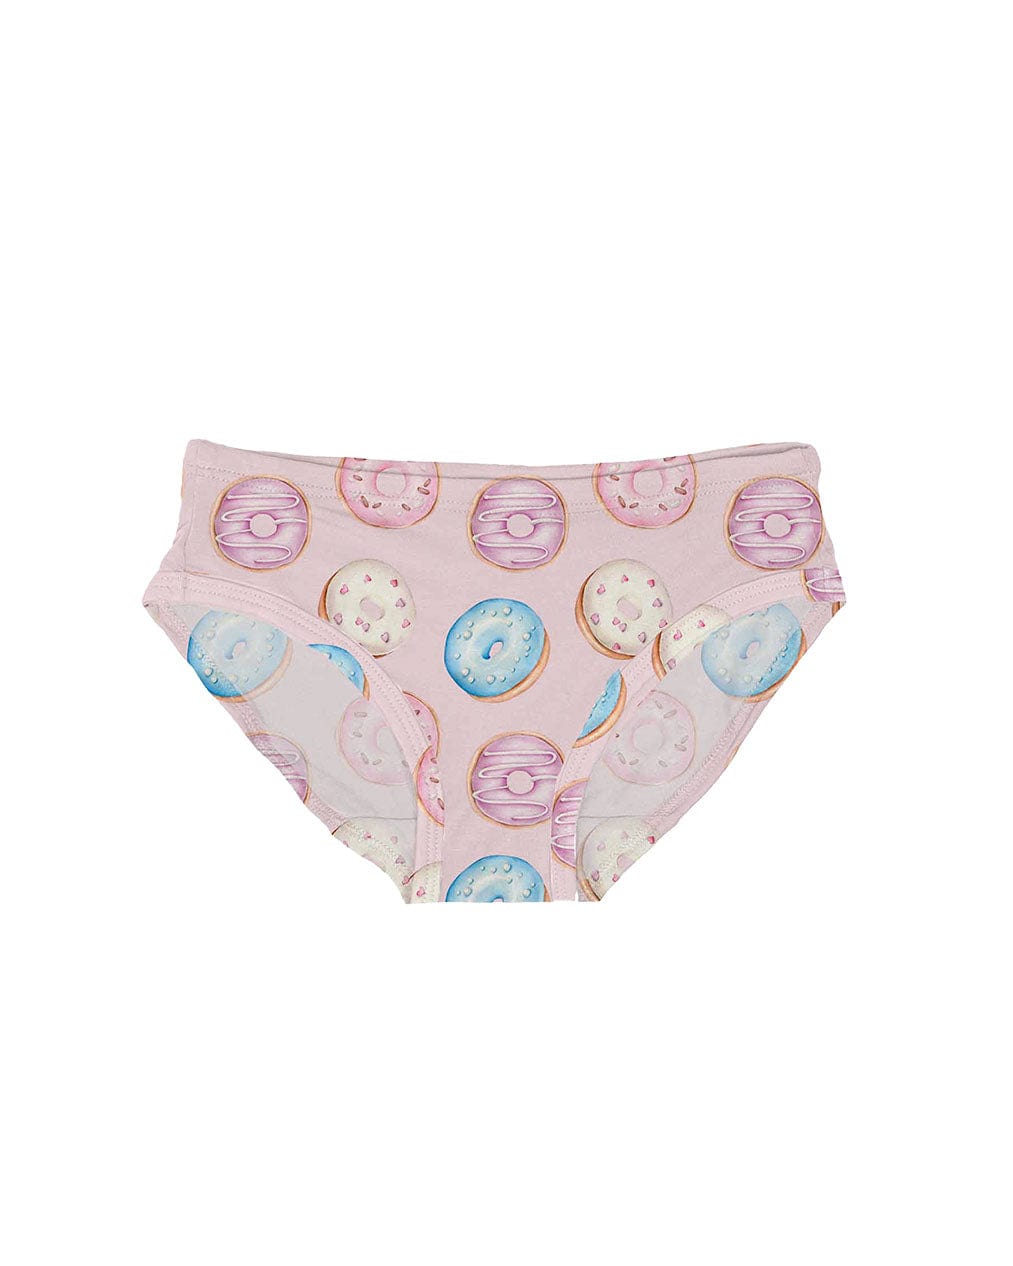 Donuts Panty pack: set of 3